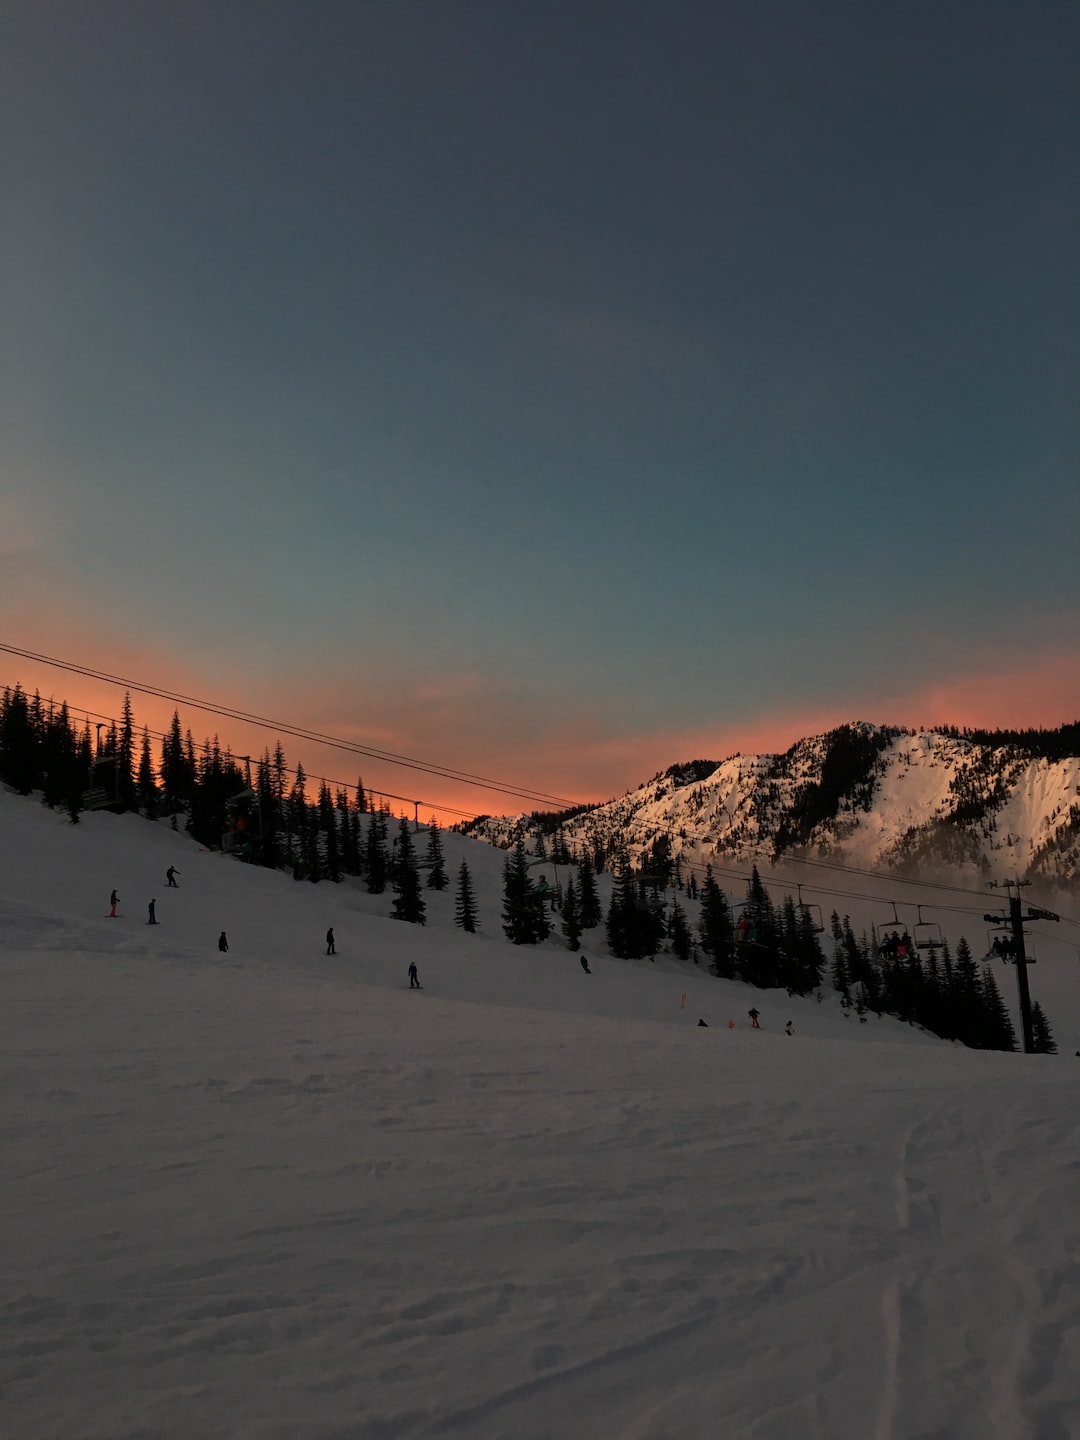 going snowboarding in the mountains in washington, came across a beautiful sunset as a lovely background for the mountain range.